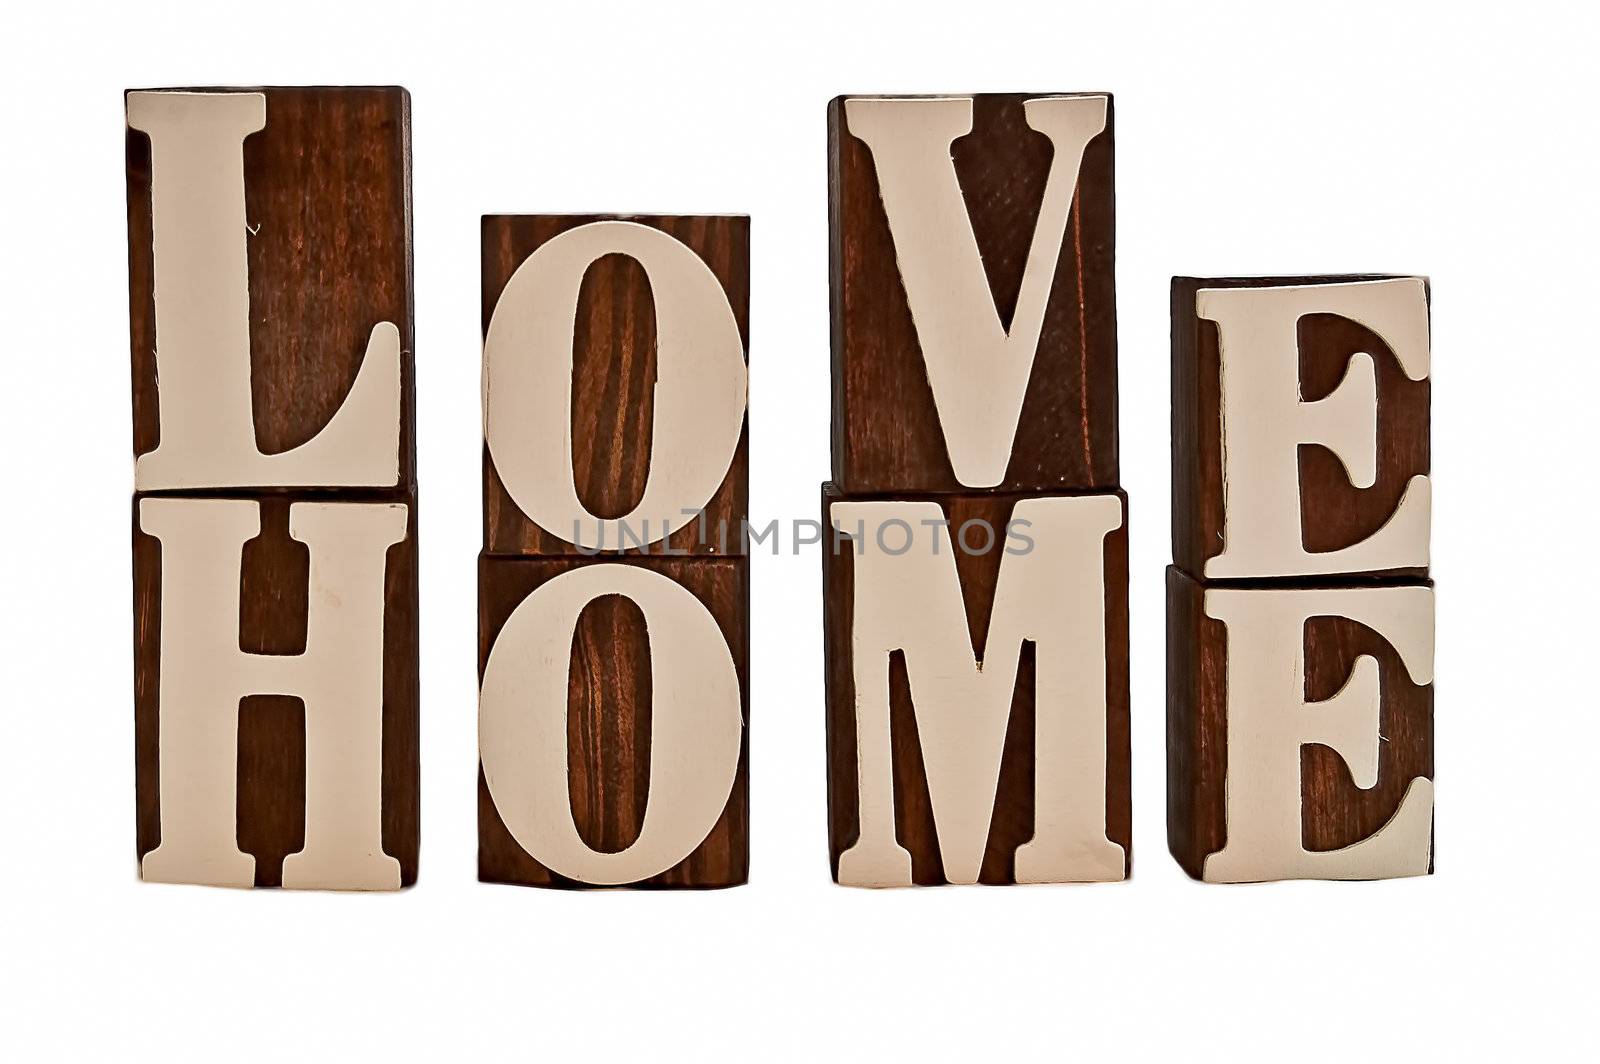 isolated over white rough edged wooden blocks spelling out love home (intentionally grundgy)